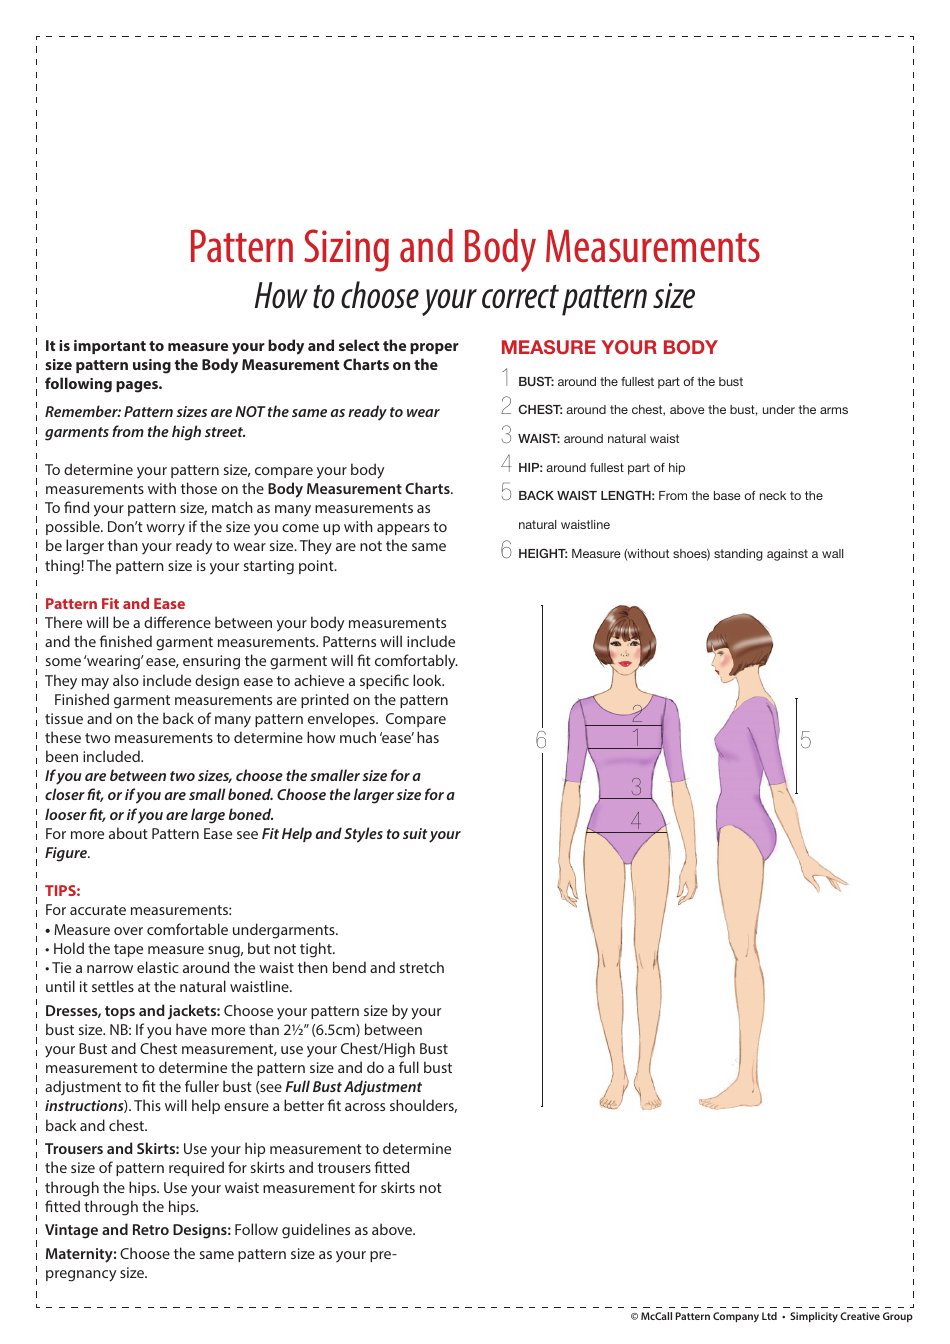 Body Measurement Chart - Women and Children, Page 1